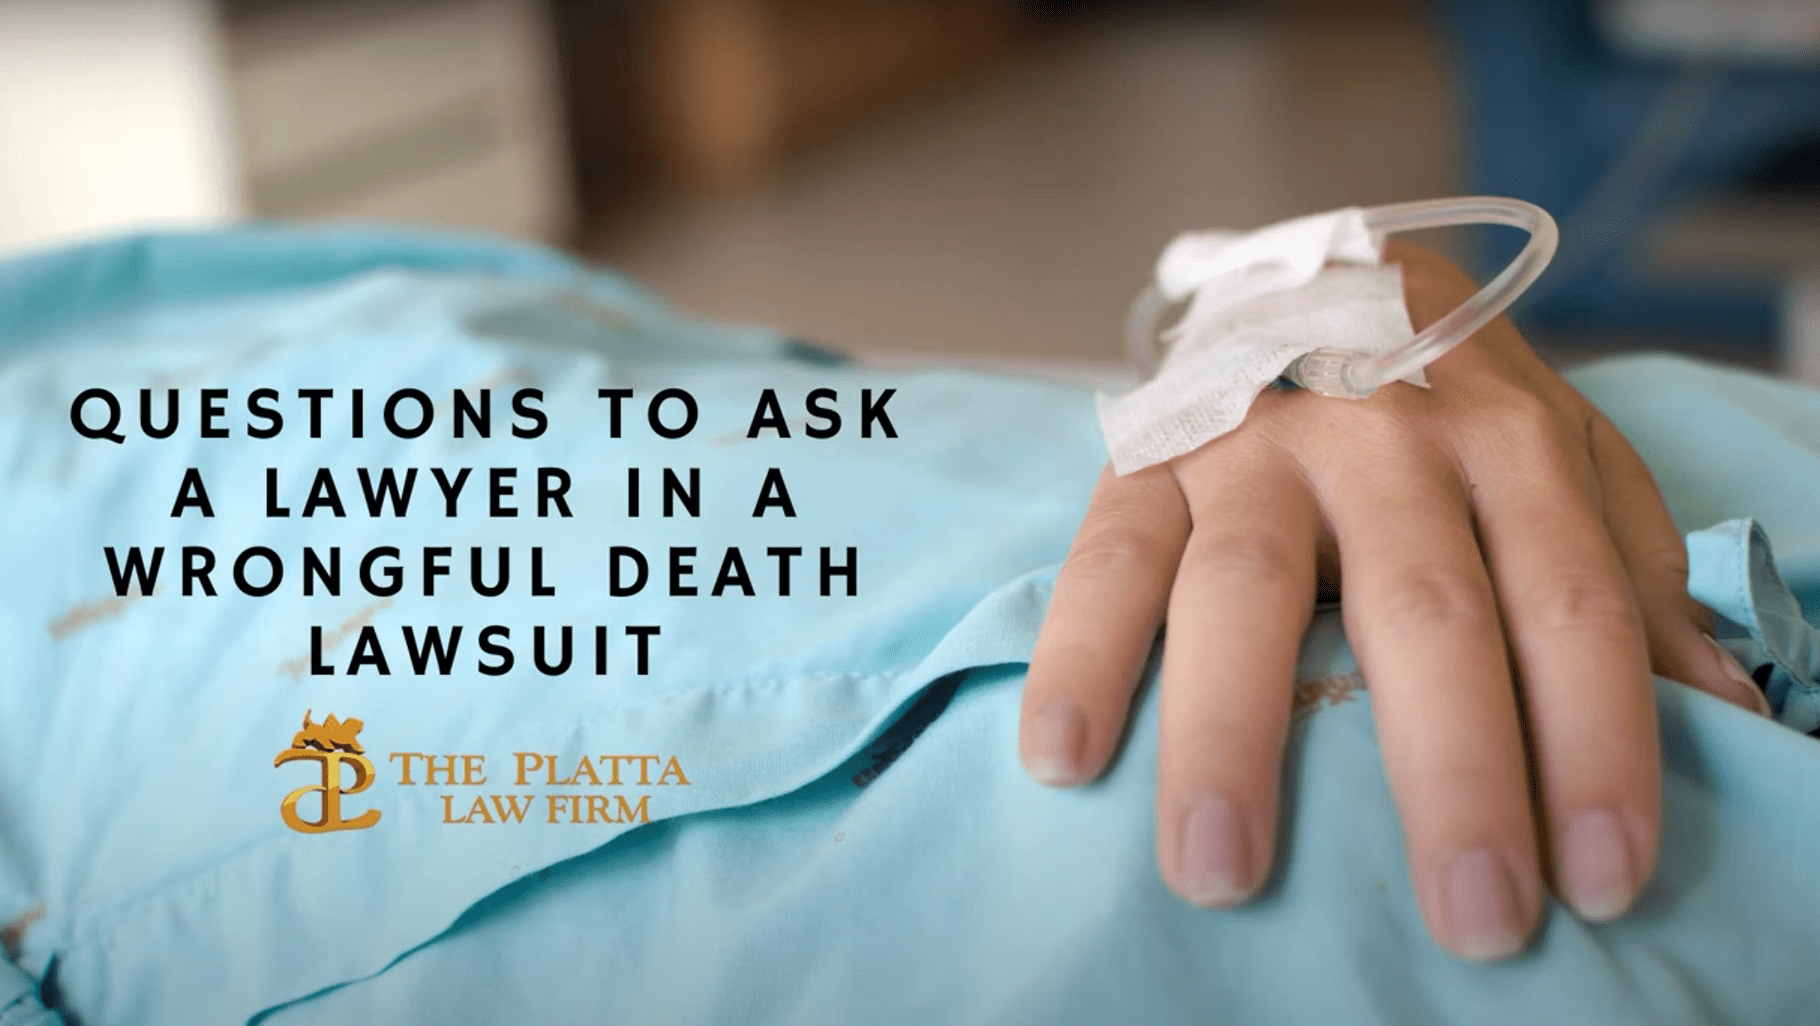 QUESTIONS TO ASK A LAWYER IN A WRONGFUL DEATH SUIT